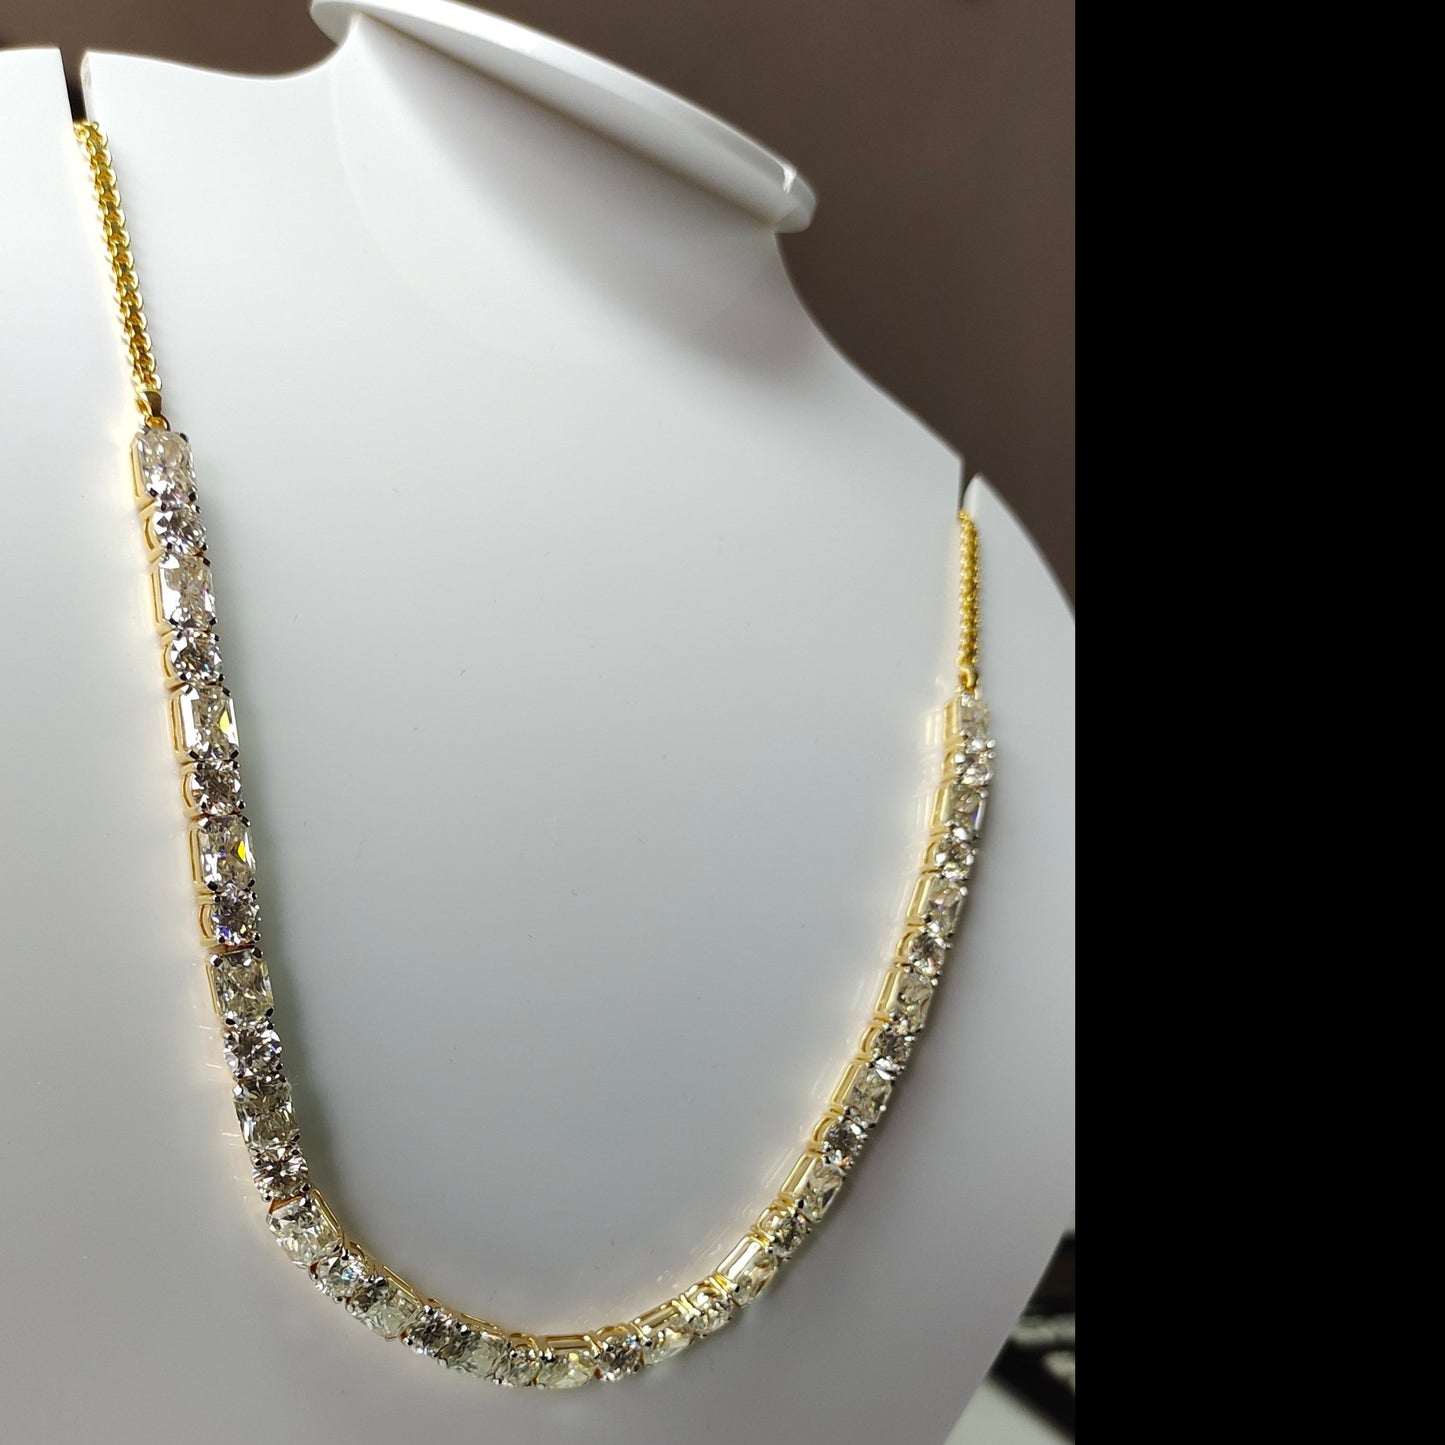 18 k Yellow Gold Solitaire Moissanite Diamond Necklace With 6*8 Radiant & 6mm Round Shape Moissanite Diamond